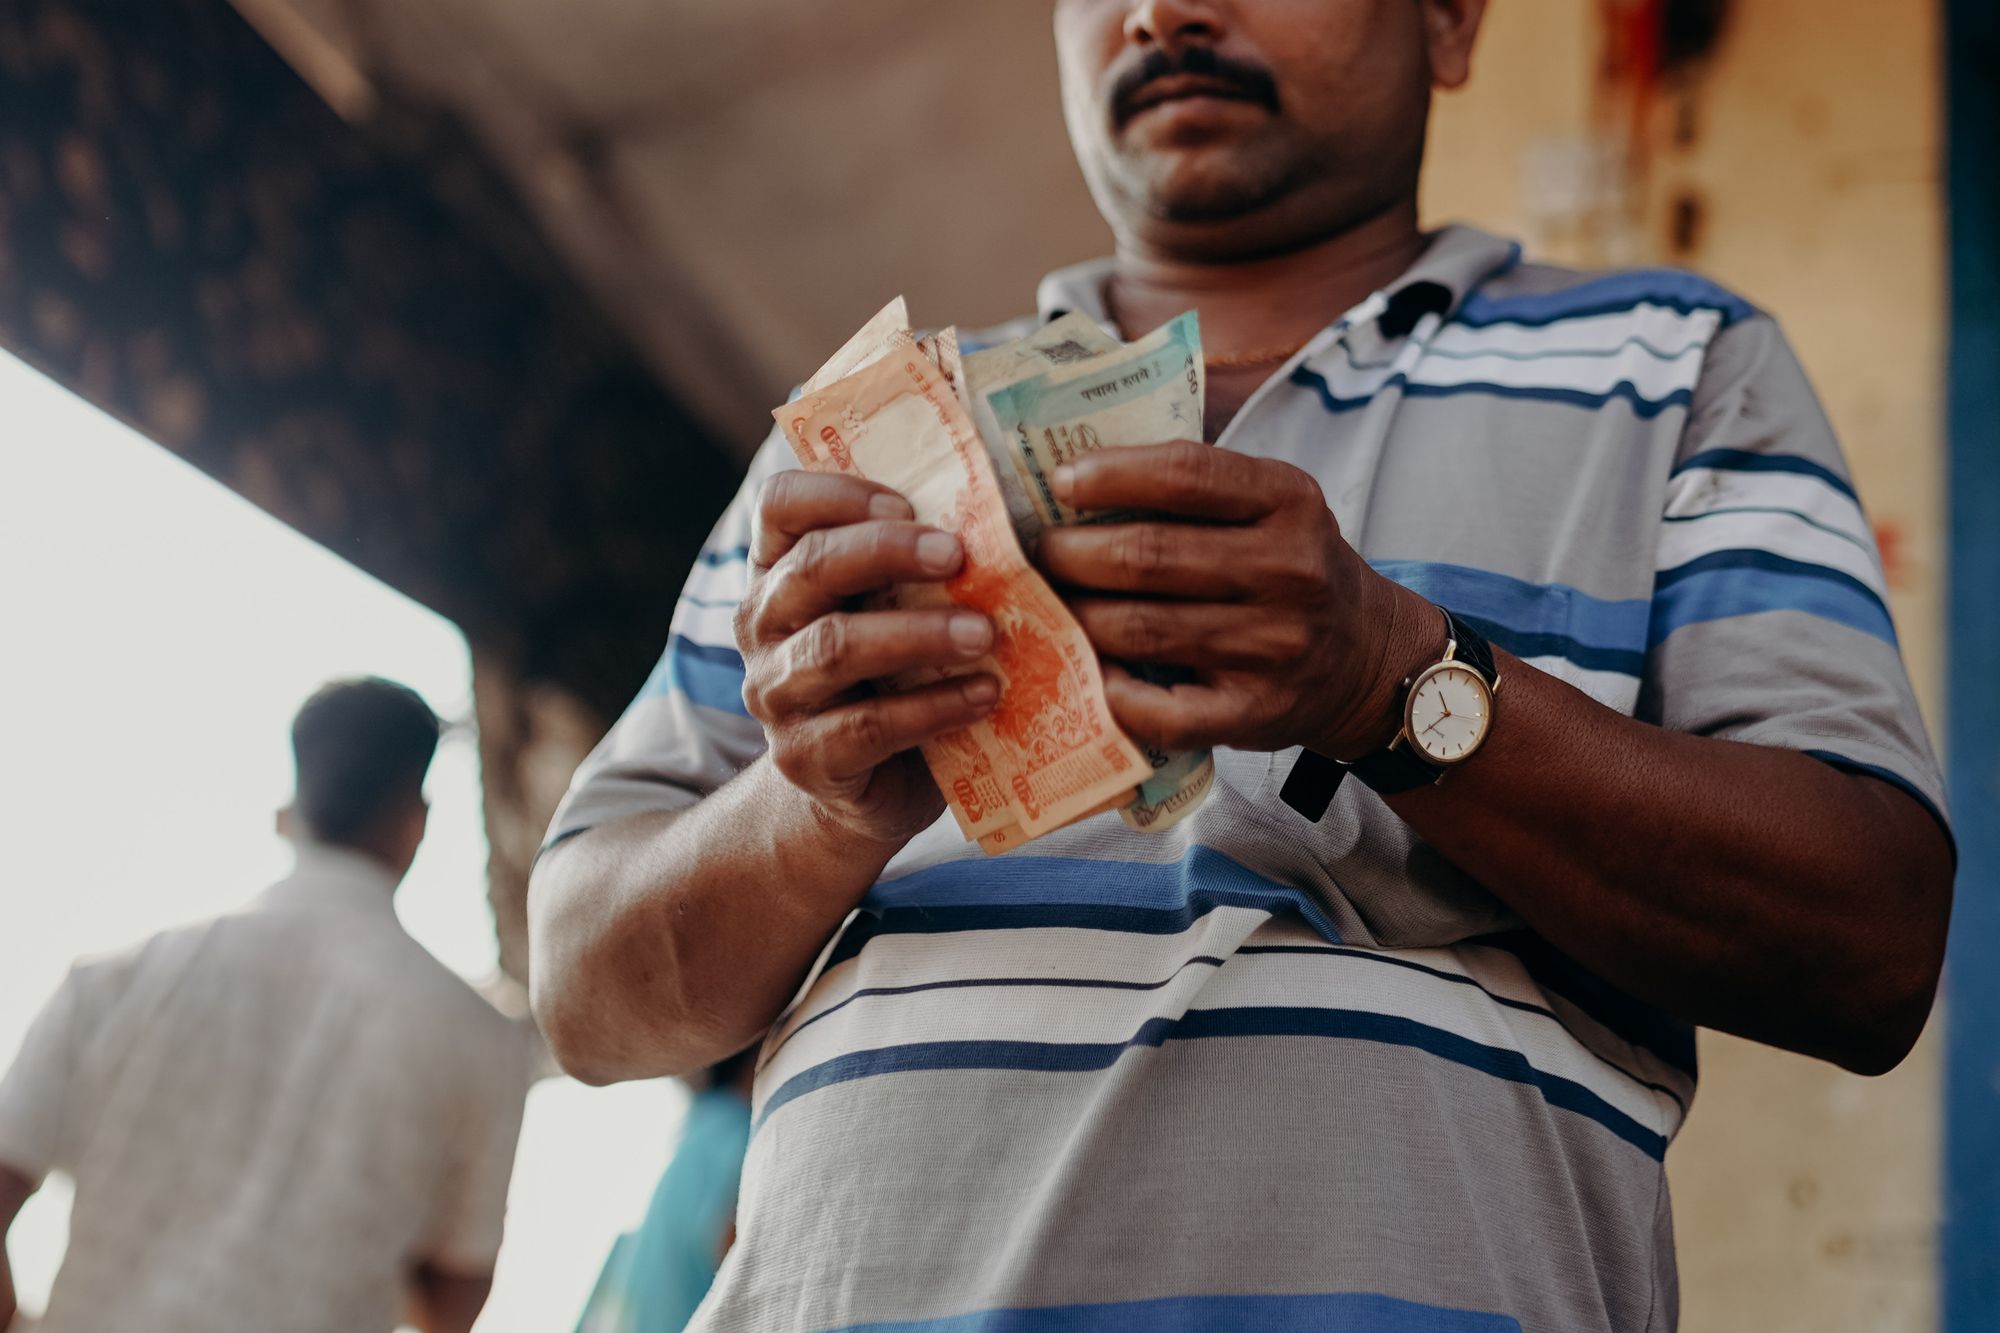 starting a microfinance business in India